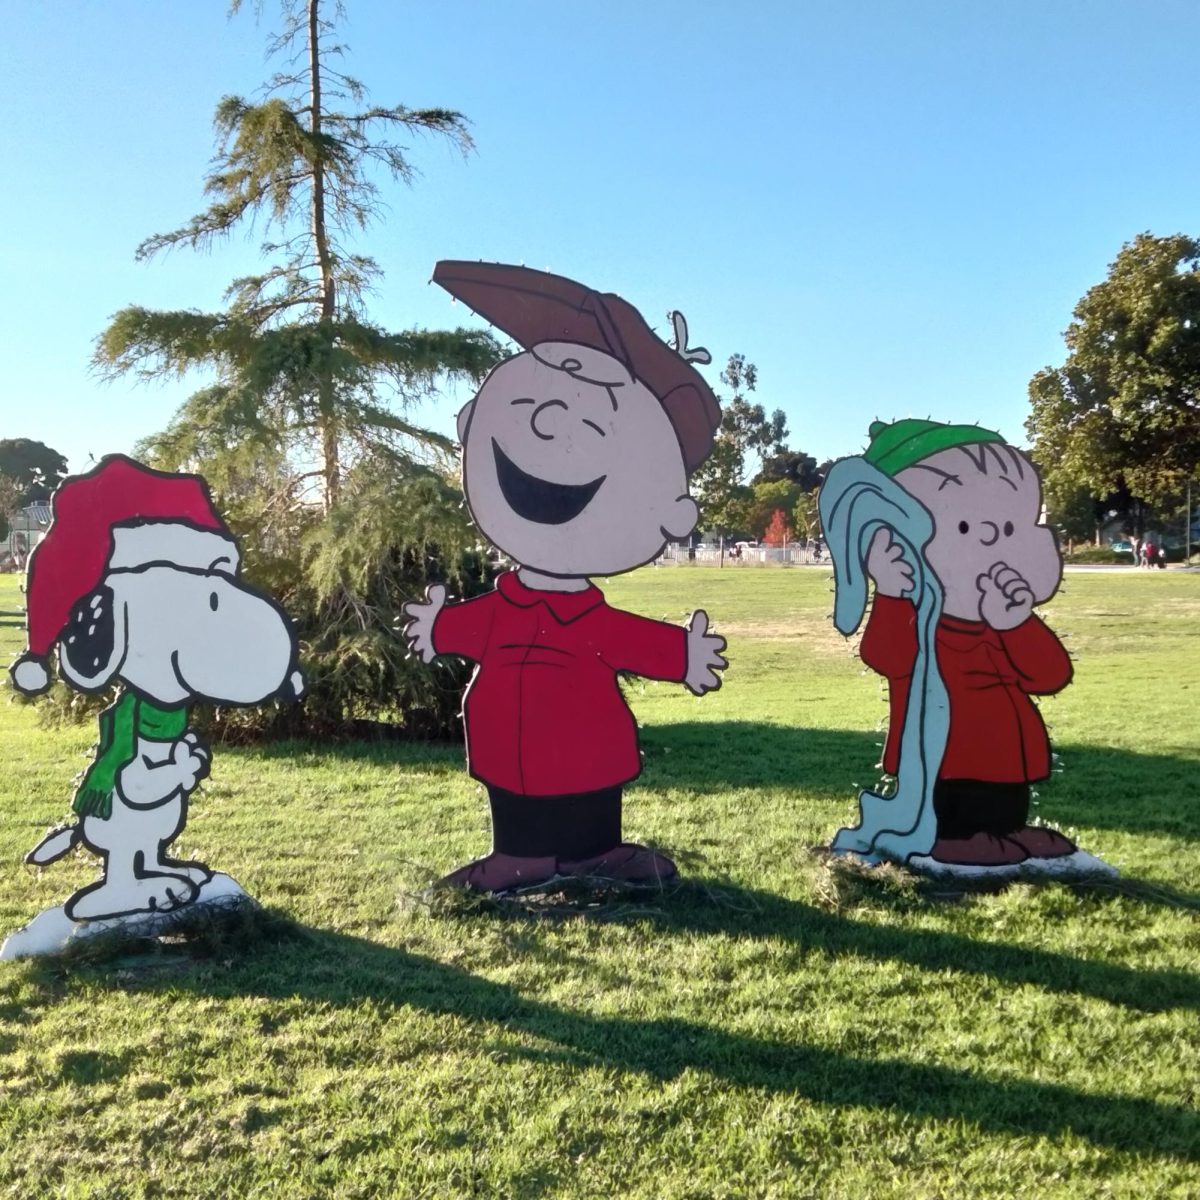 12/6/23-While this may not be on school campus its certainly close by it. As I was waiting for the public bus, I noticed that they put up these Peanuts character cut outs. You got characters, like Charlie Brown, Linus and obviously Snoopy in the Christmas spirit.